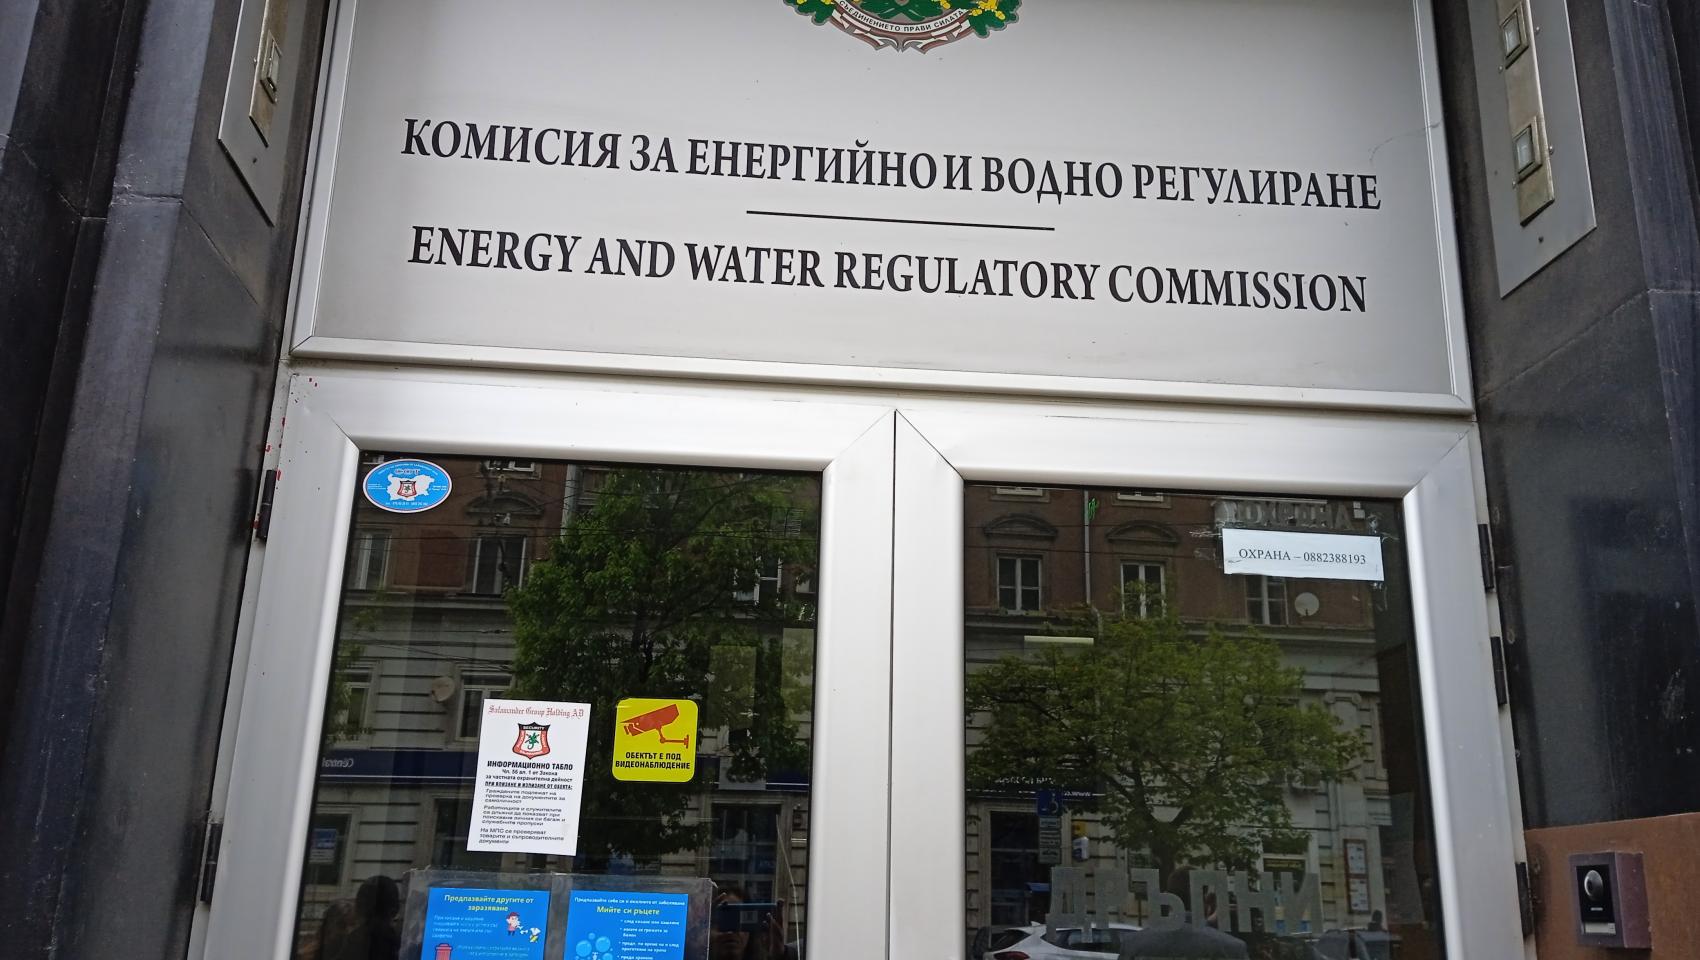 The Commission for Energy and Water Regulation at its meeting